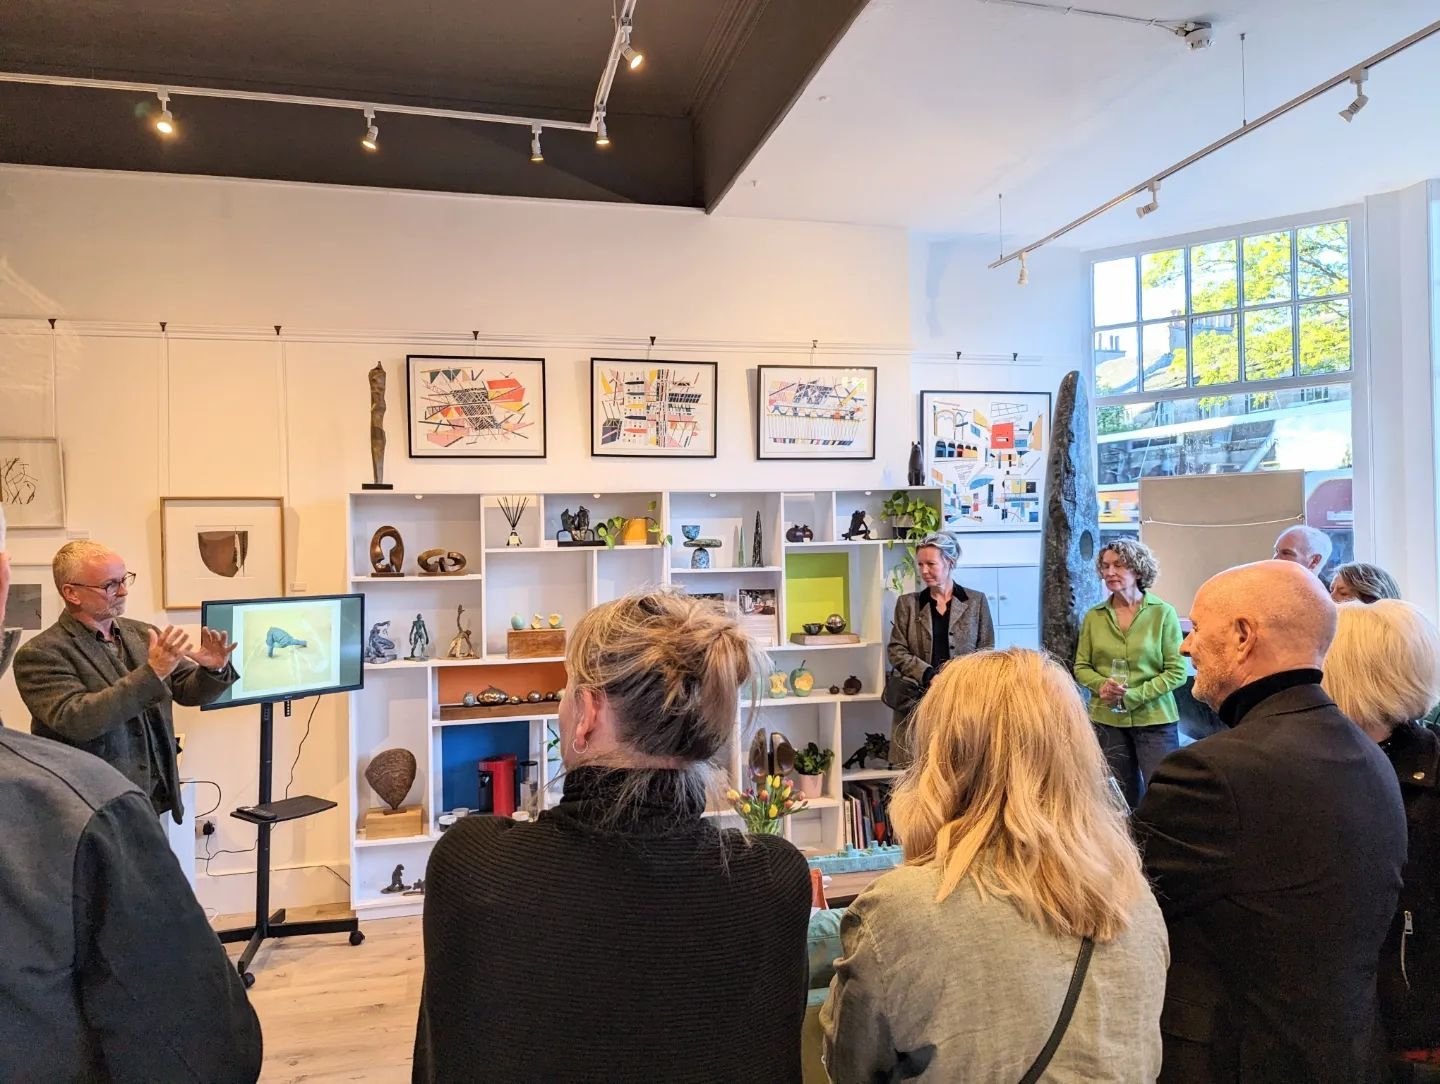 We had a fantastic evening welcoming sculptor Andy Scott @andyscott.sculptures into the gallery last night, celebrating 10 years of the much loved Kelpies! Andy gave a fantastic presentation sharing insight on his practice and past projects, as well 